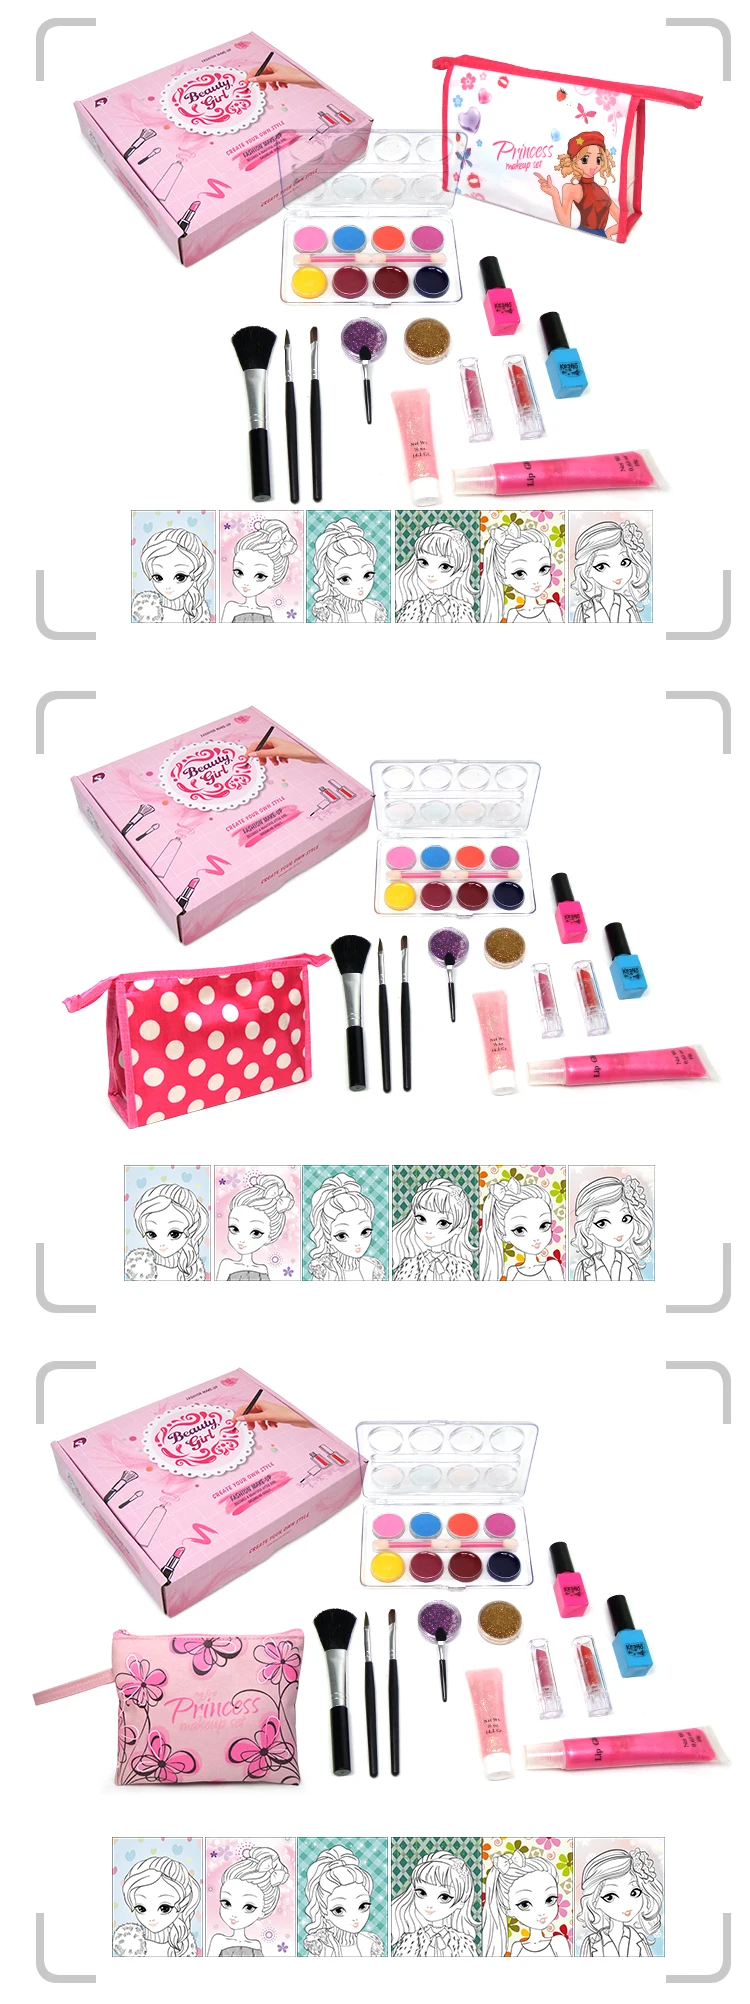 China manufactured pids pretend play toys heat-shaped makeup kits for girls cosmetic